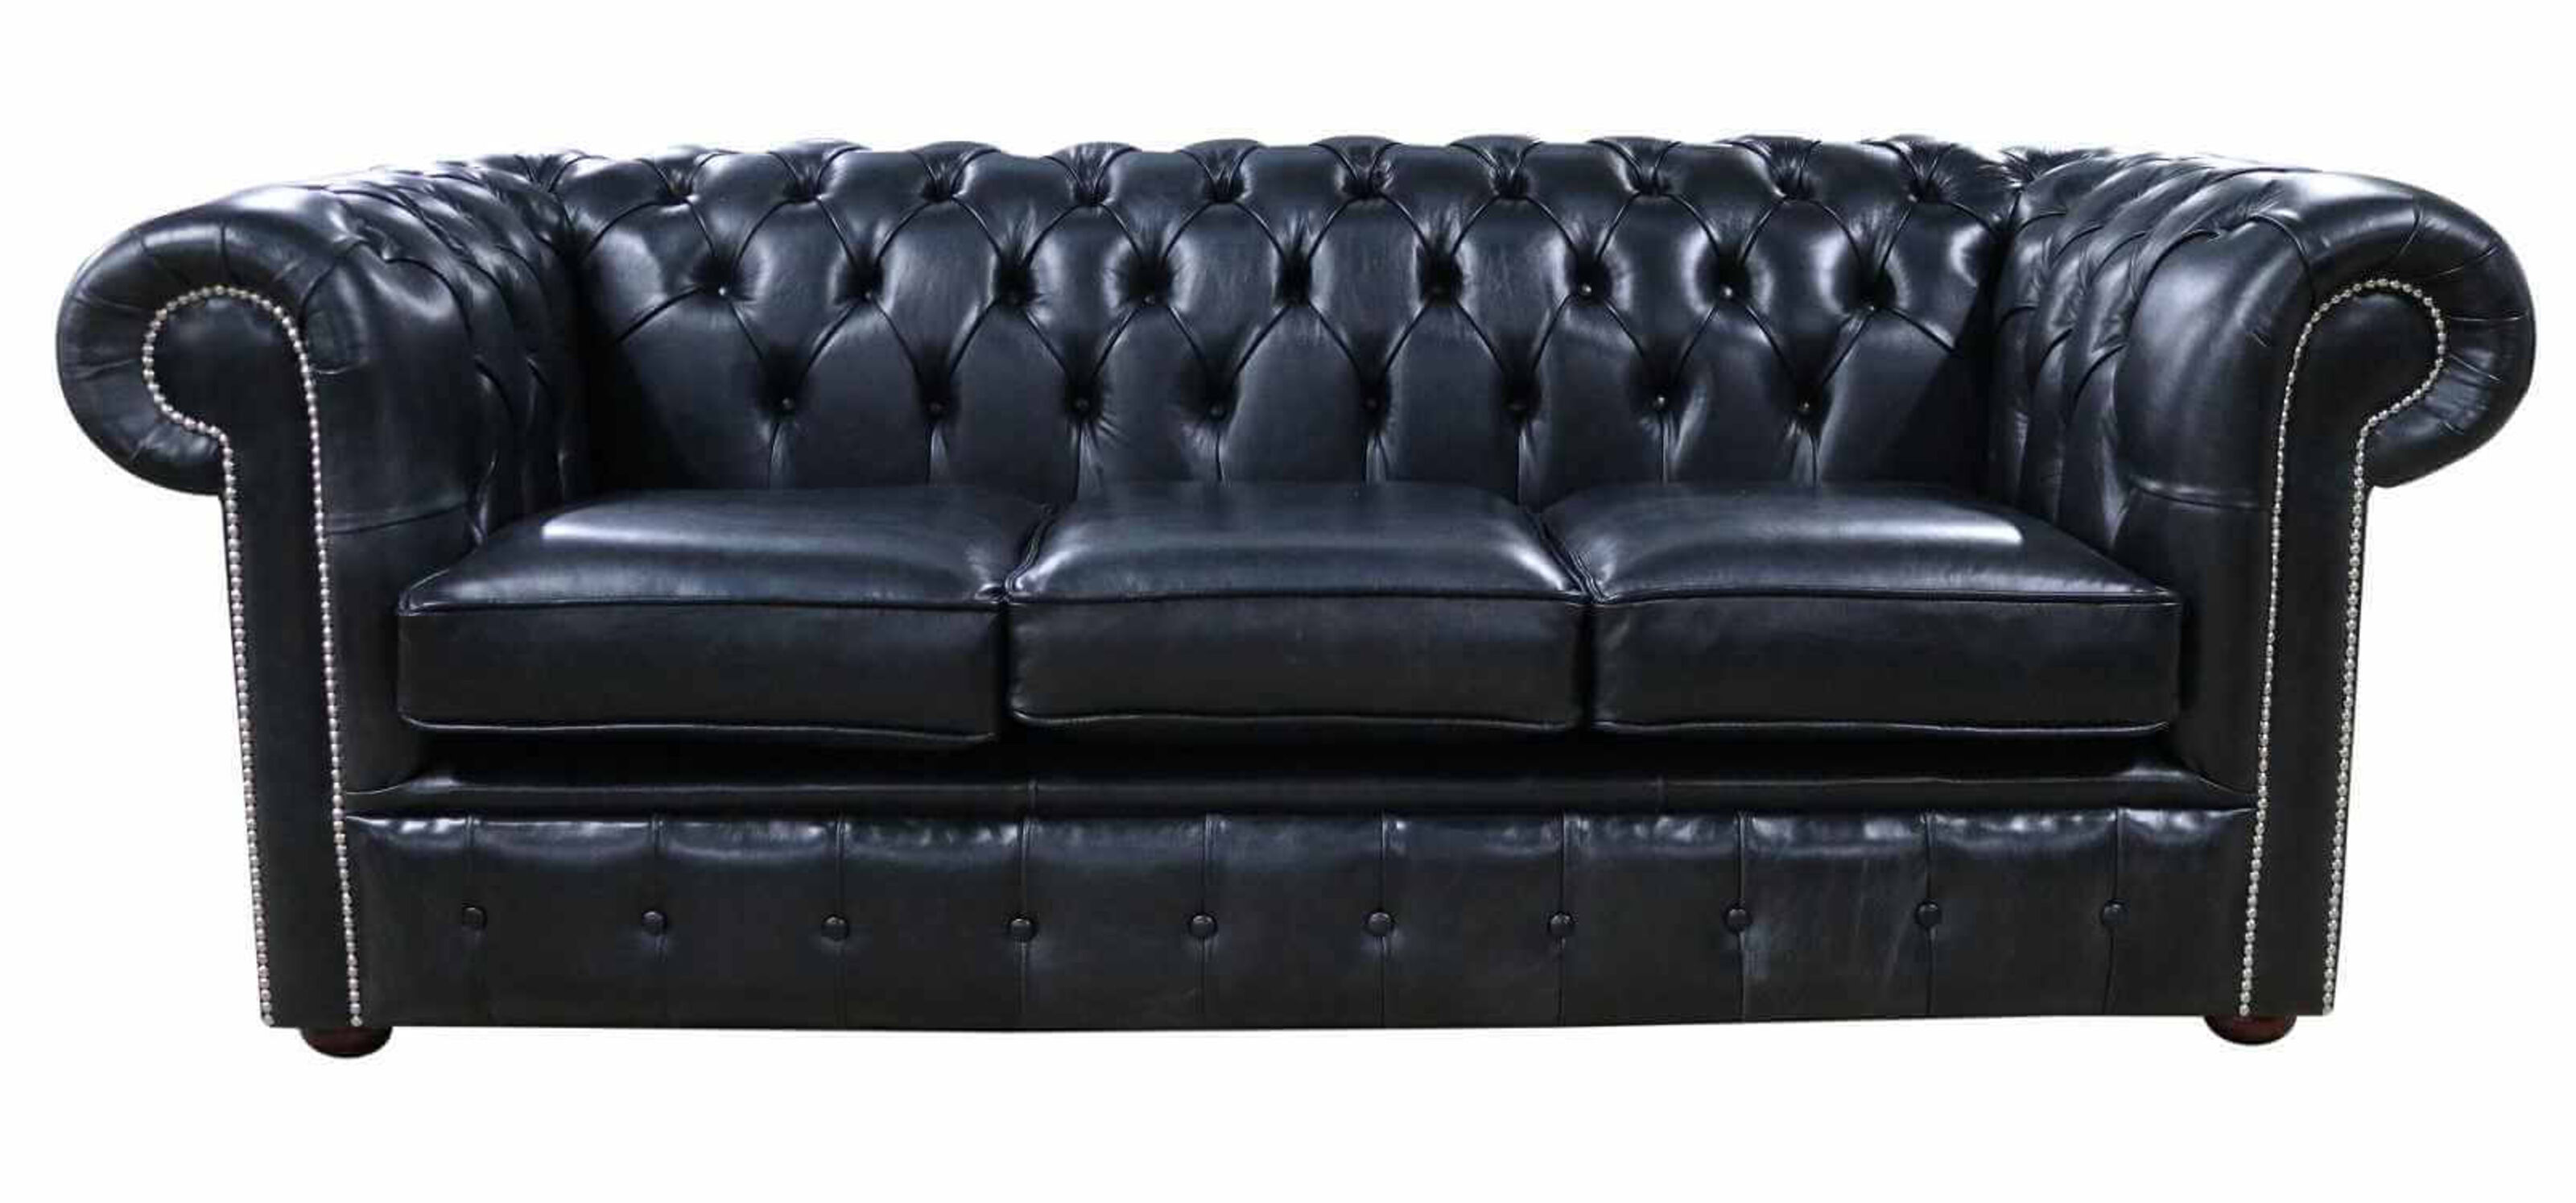 Classic Comfort Discovering the Chesterfield English Sofa  %Post Title